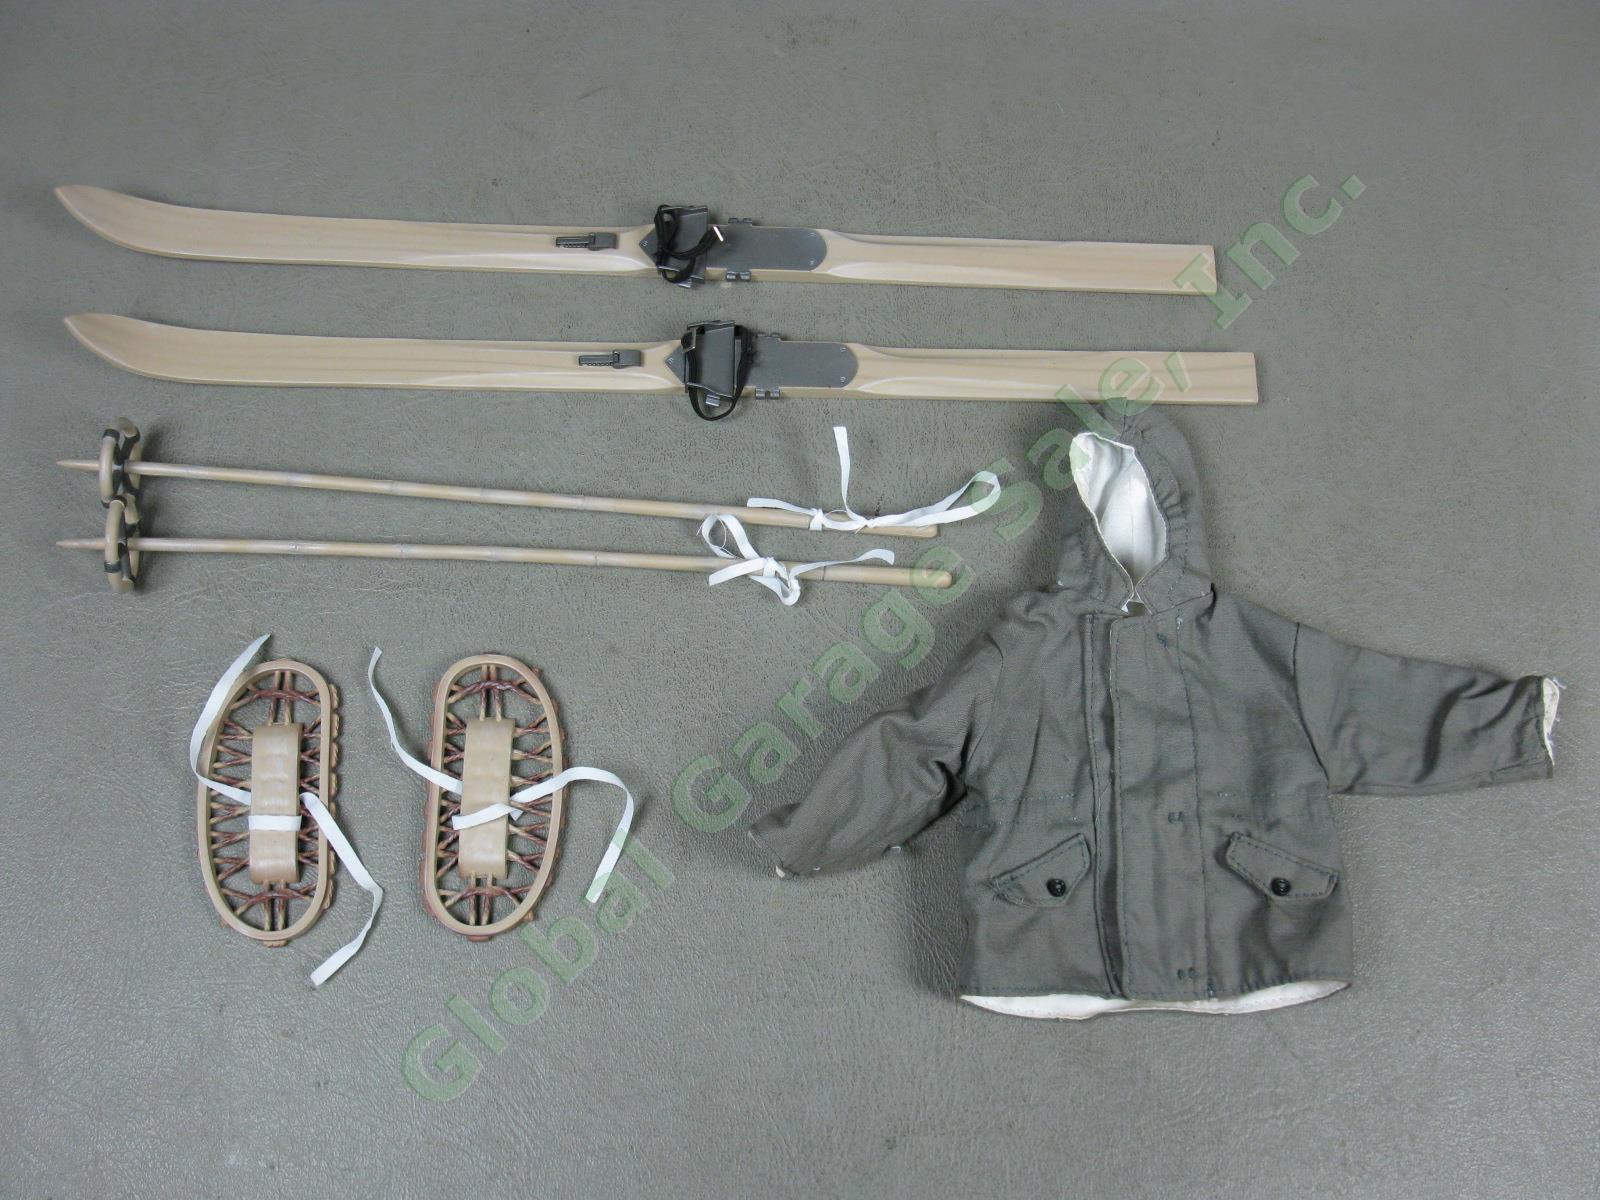 4 Dragon 1/6 Scale 12" WWII German Winter Soldier Figures Lot Skis Snowshoes +NR 5